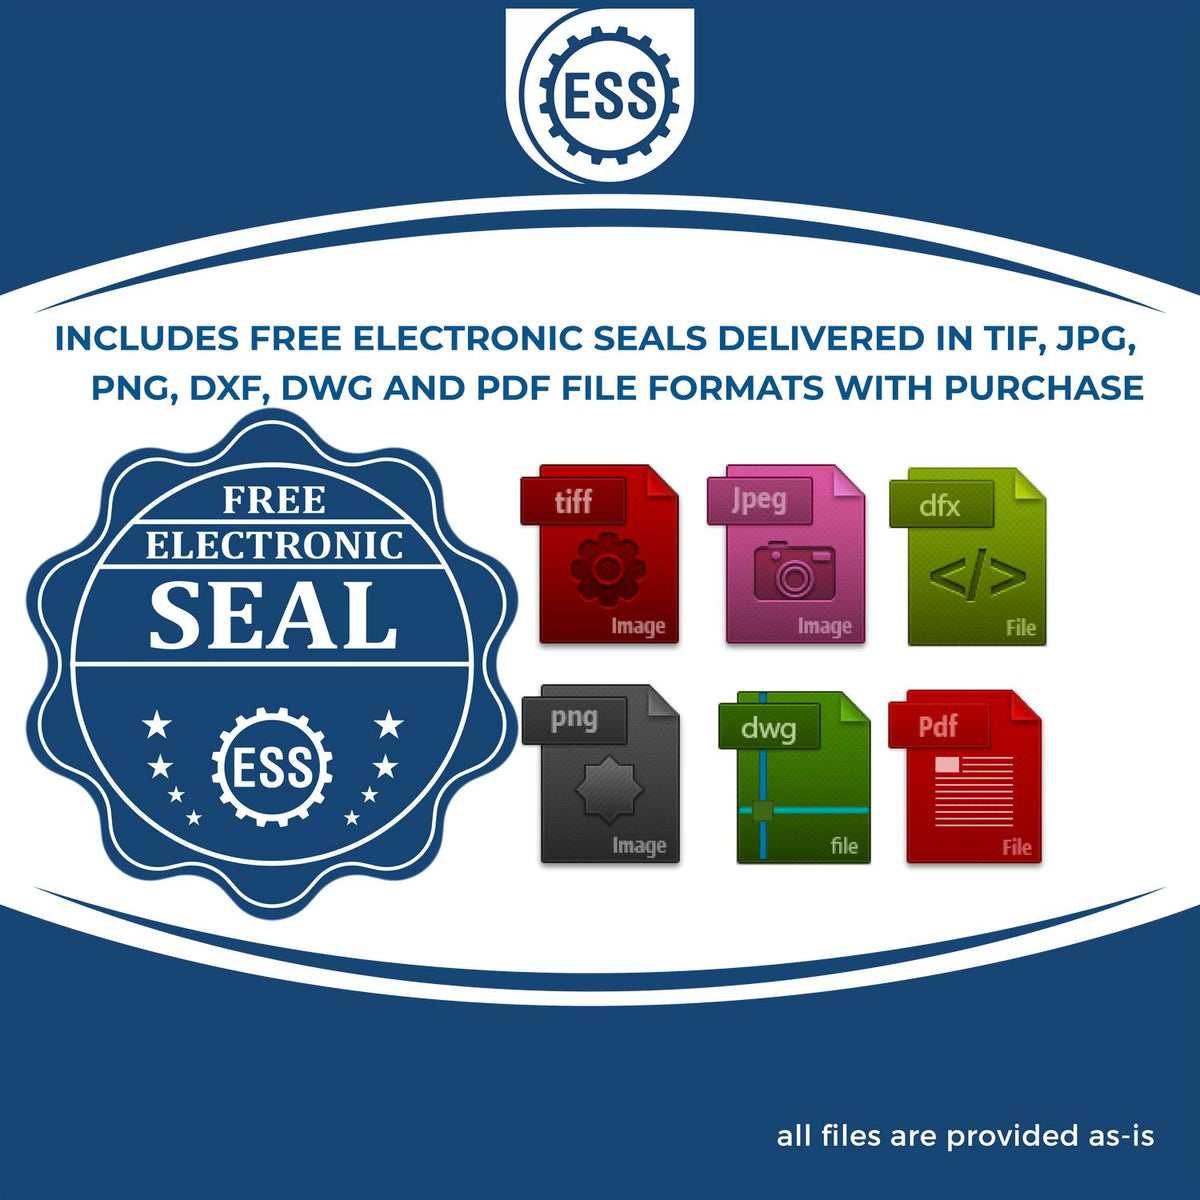 An infographic for the free electronic seal for the MaxLight Premium Pre-Inked Iowa State Seal Notarial Stamp illustrating the different file type icons such as DXF, DWG, TIF, JPG and PNG.